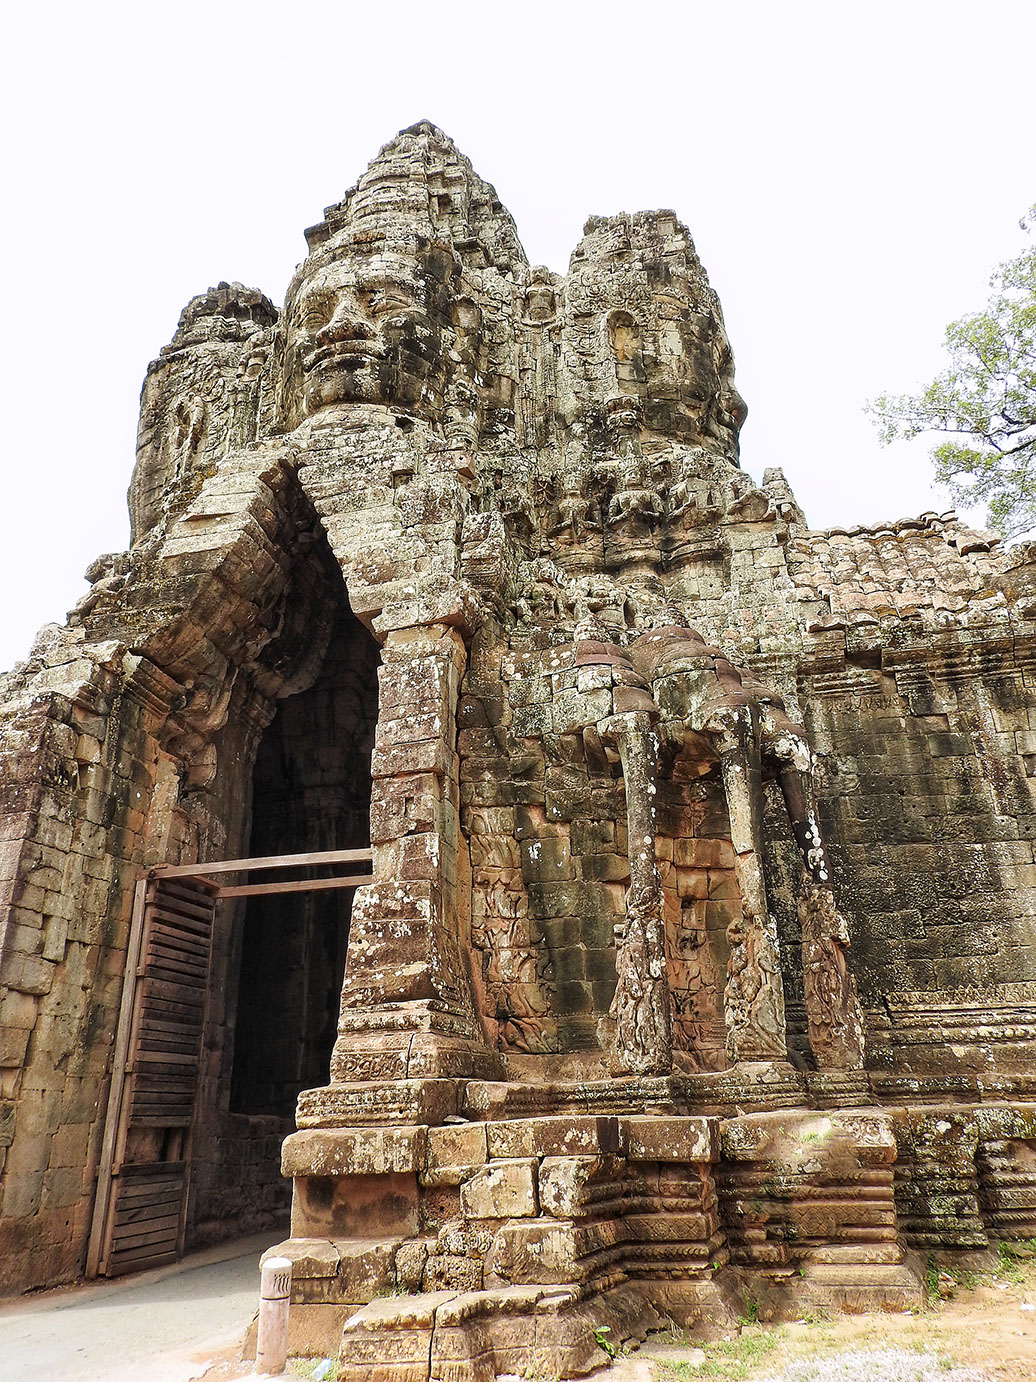 The intricate architecture of the gates at Angkor Thom during the Khmer era